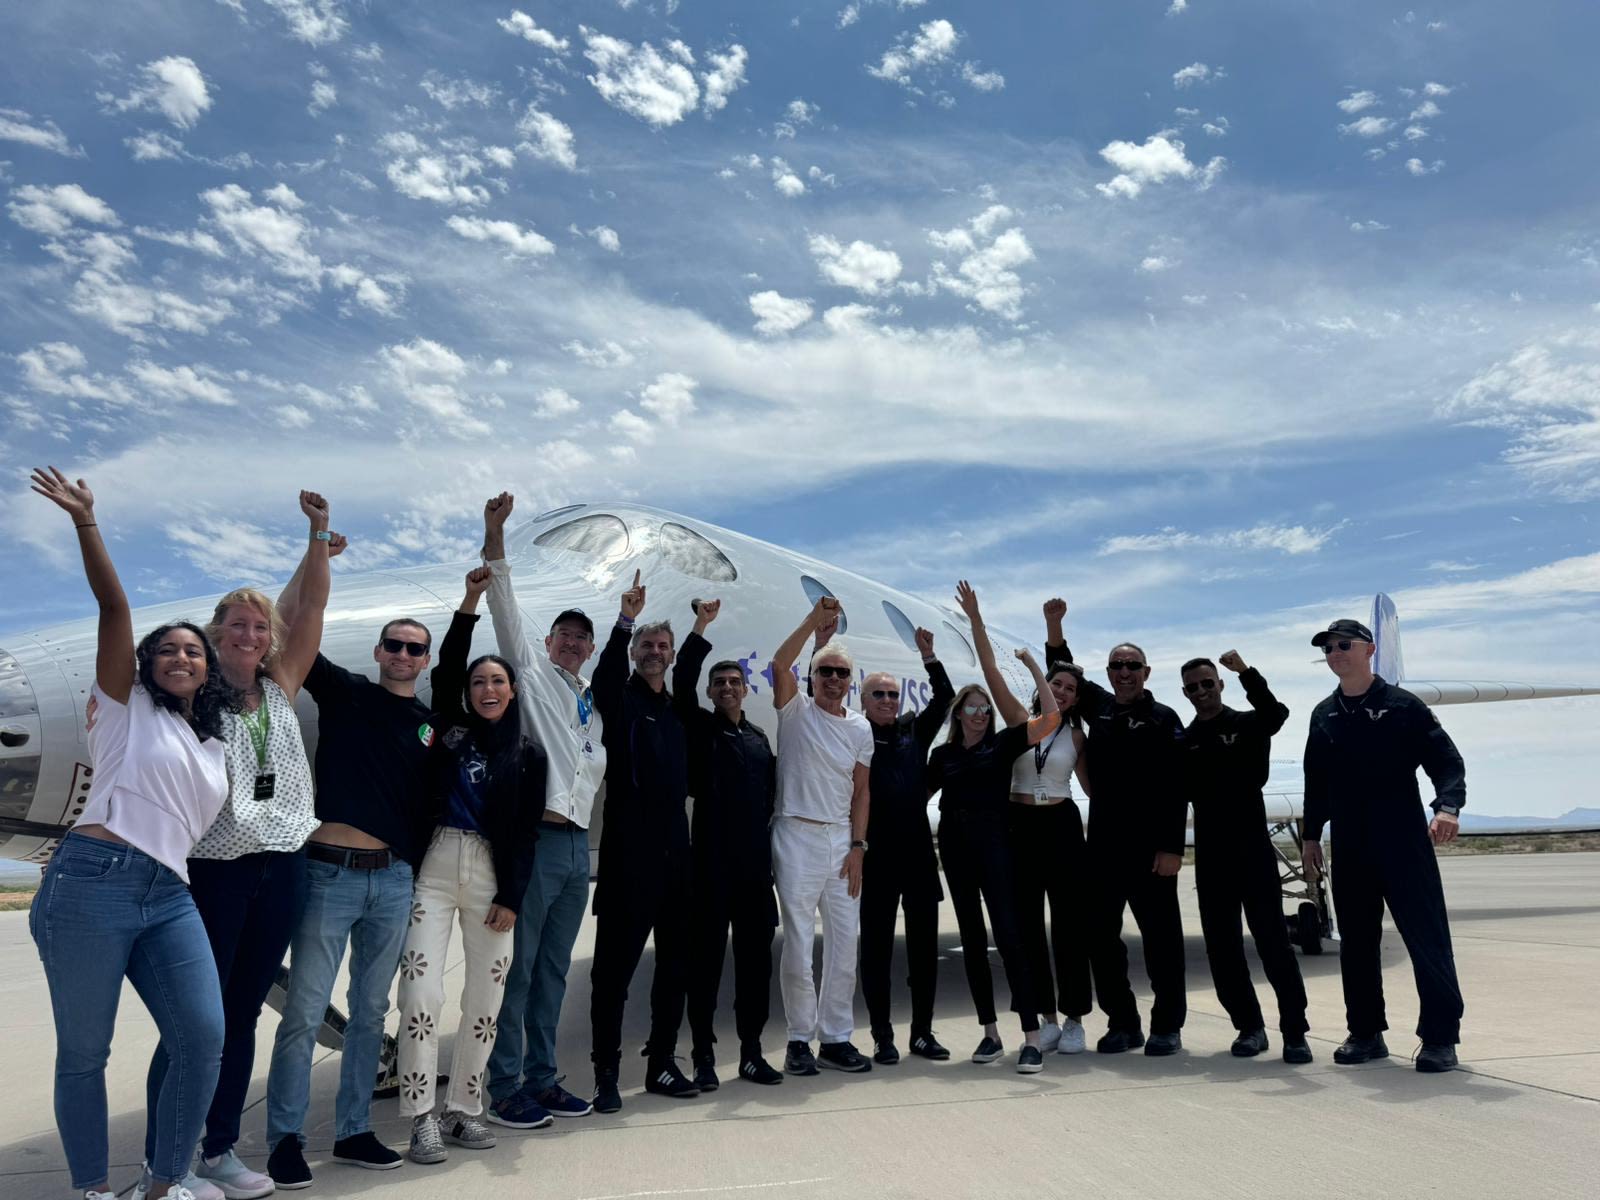 Richard Branson with the Galactic 07 team